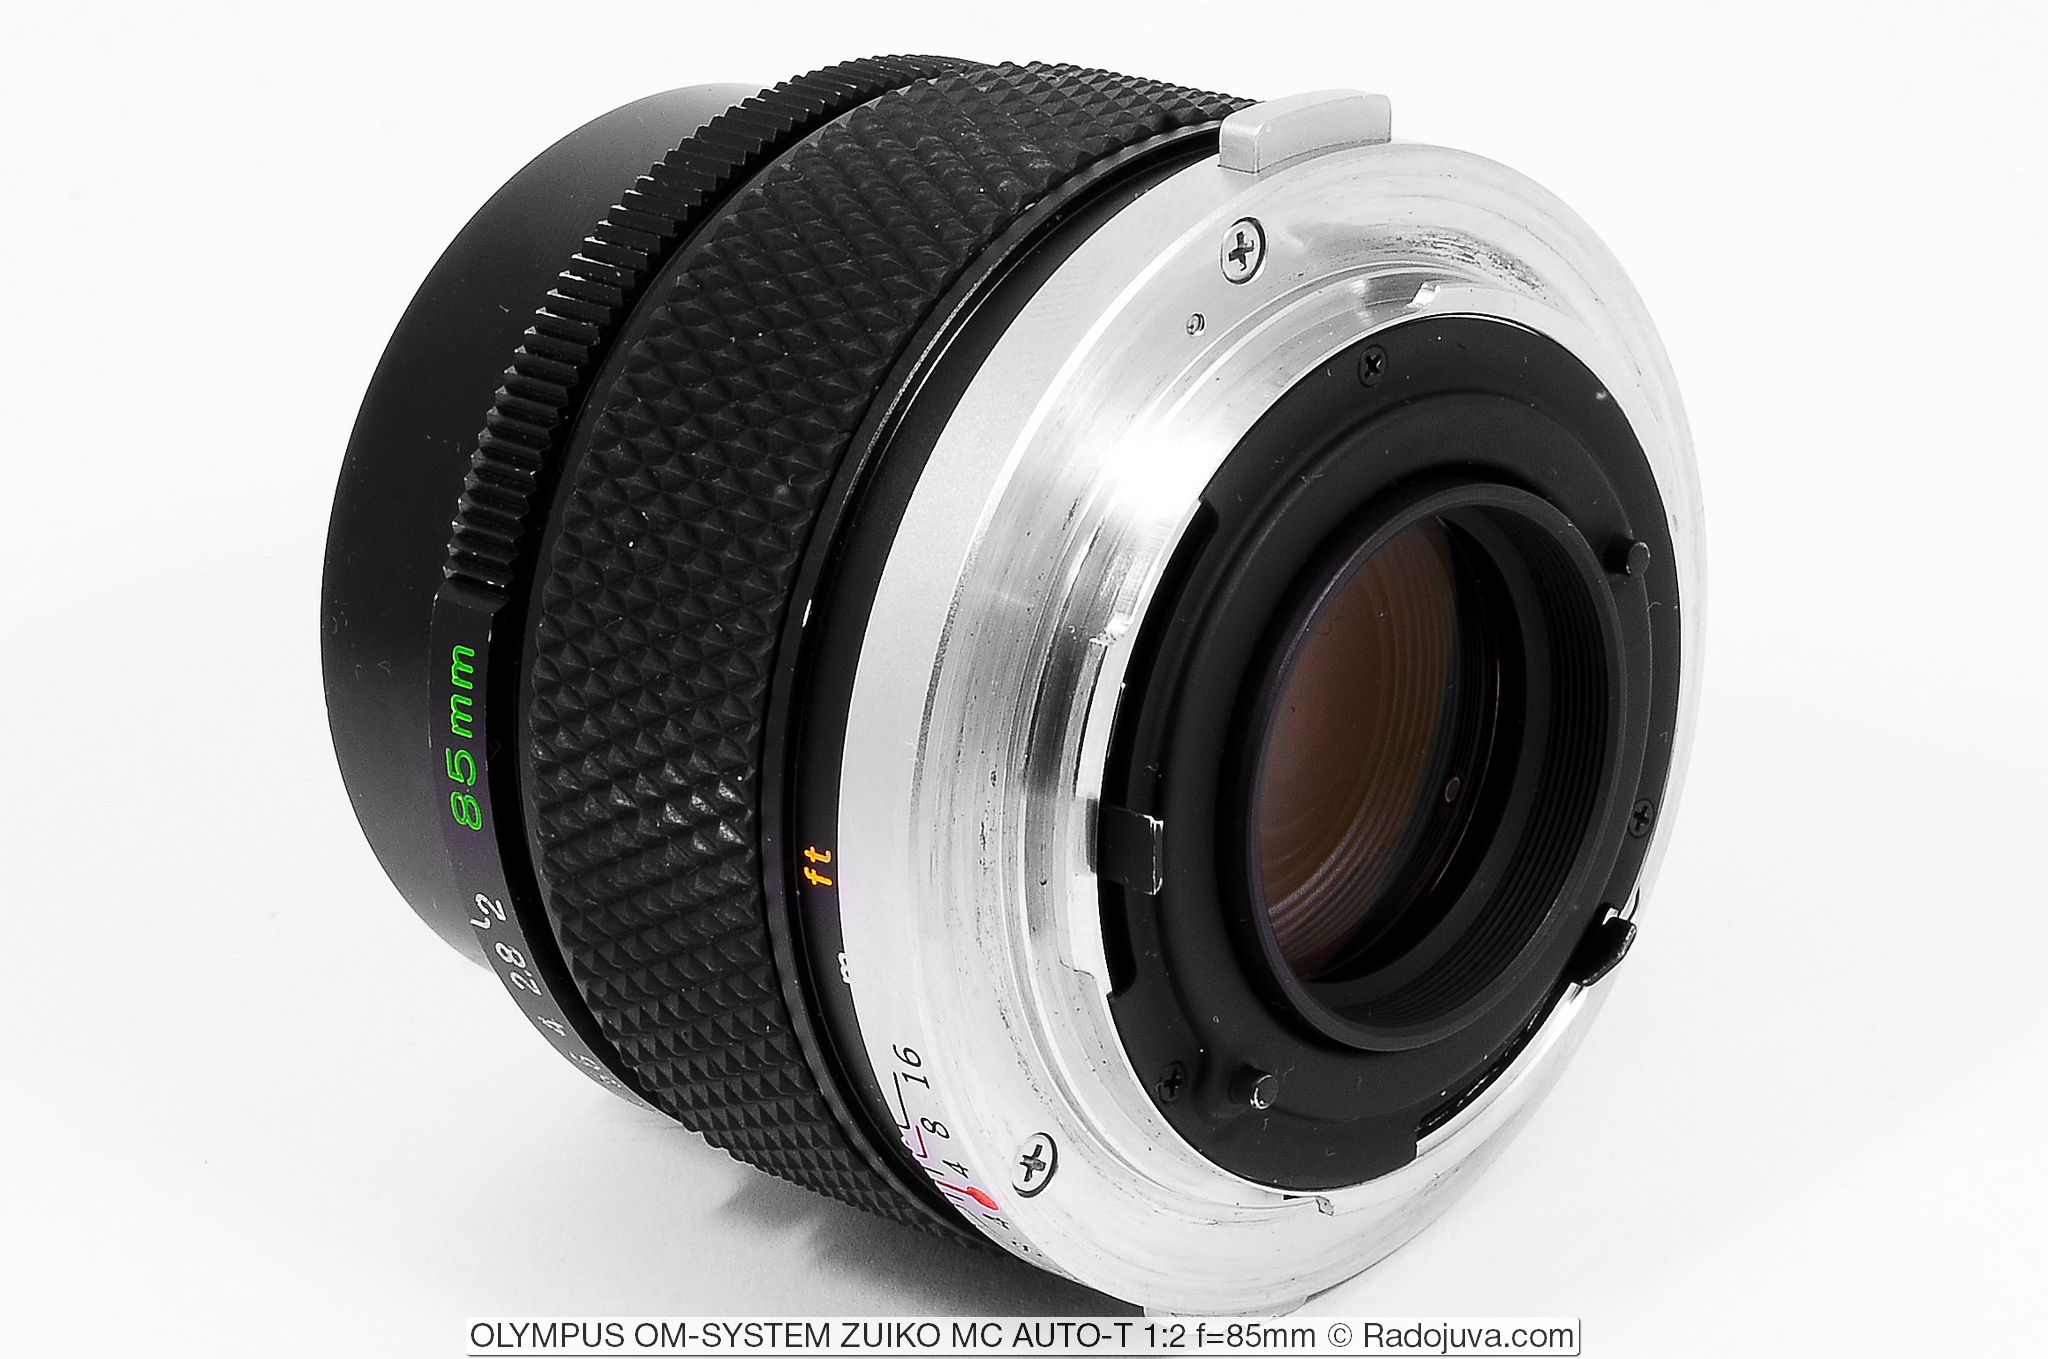 Overview of the portrait lens OLYMPUS OM-SYSTEM ZUIKO MC AUTO-T 1 